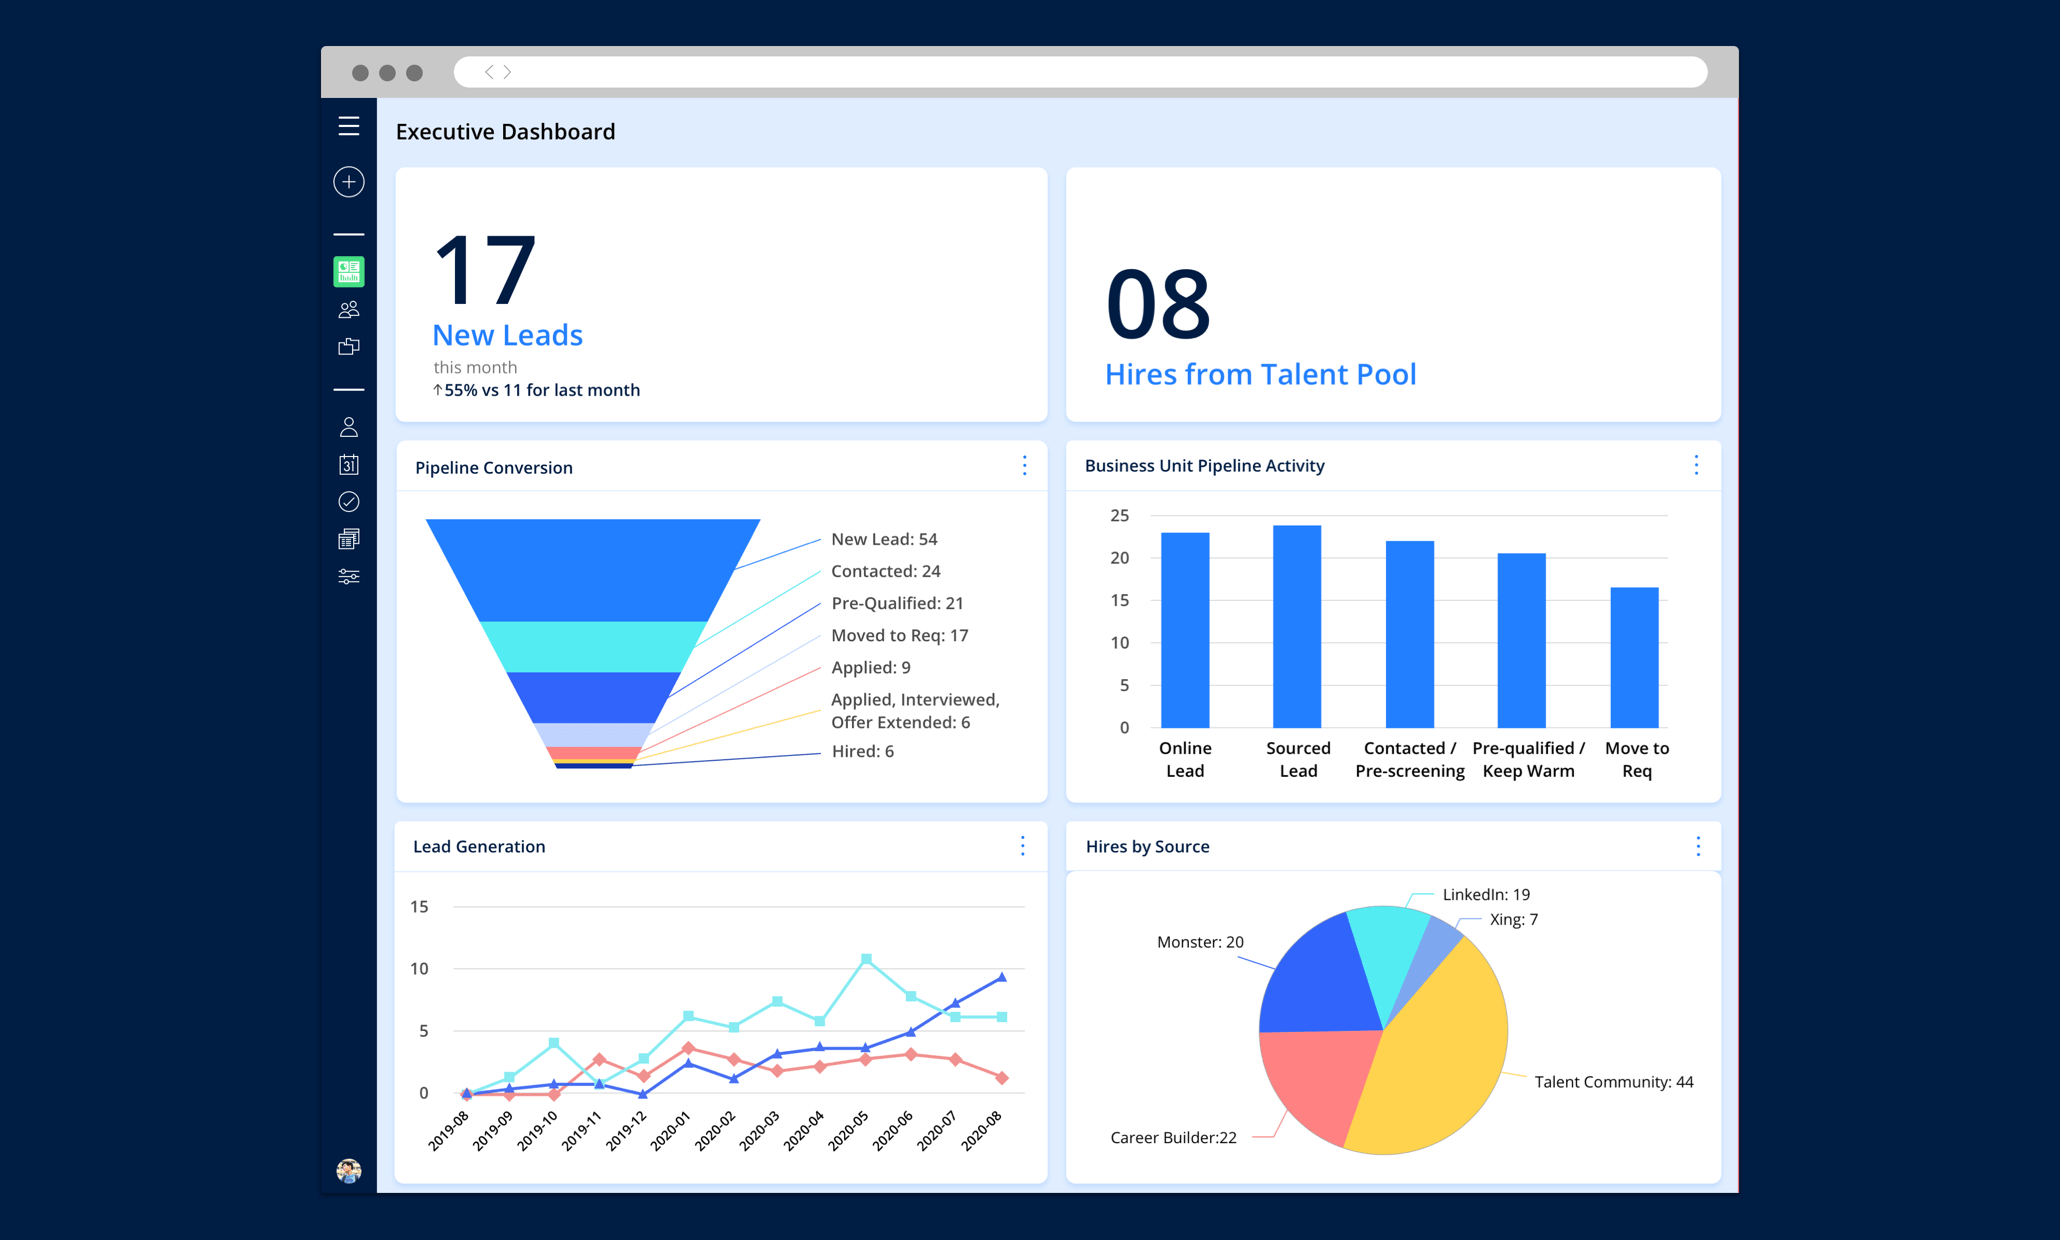 A dashboard with metrics such as new leads, number of hires from talent pool, pipeline conversion and hires by source.